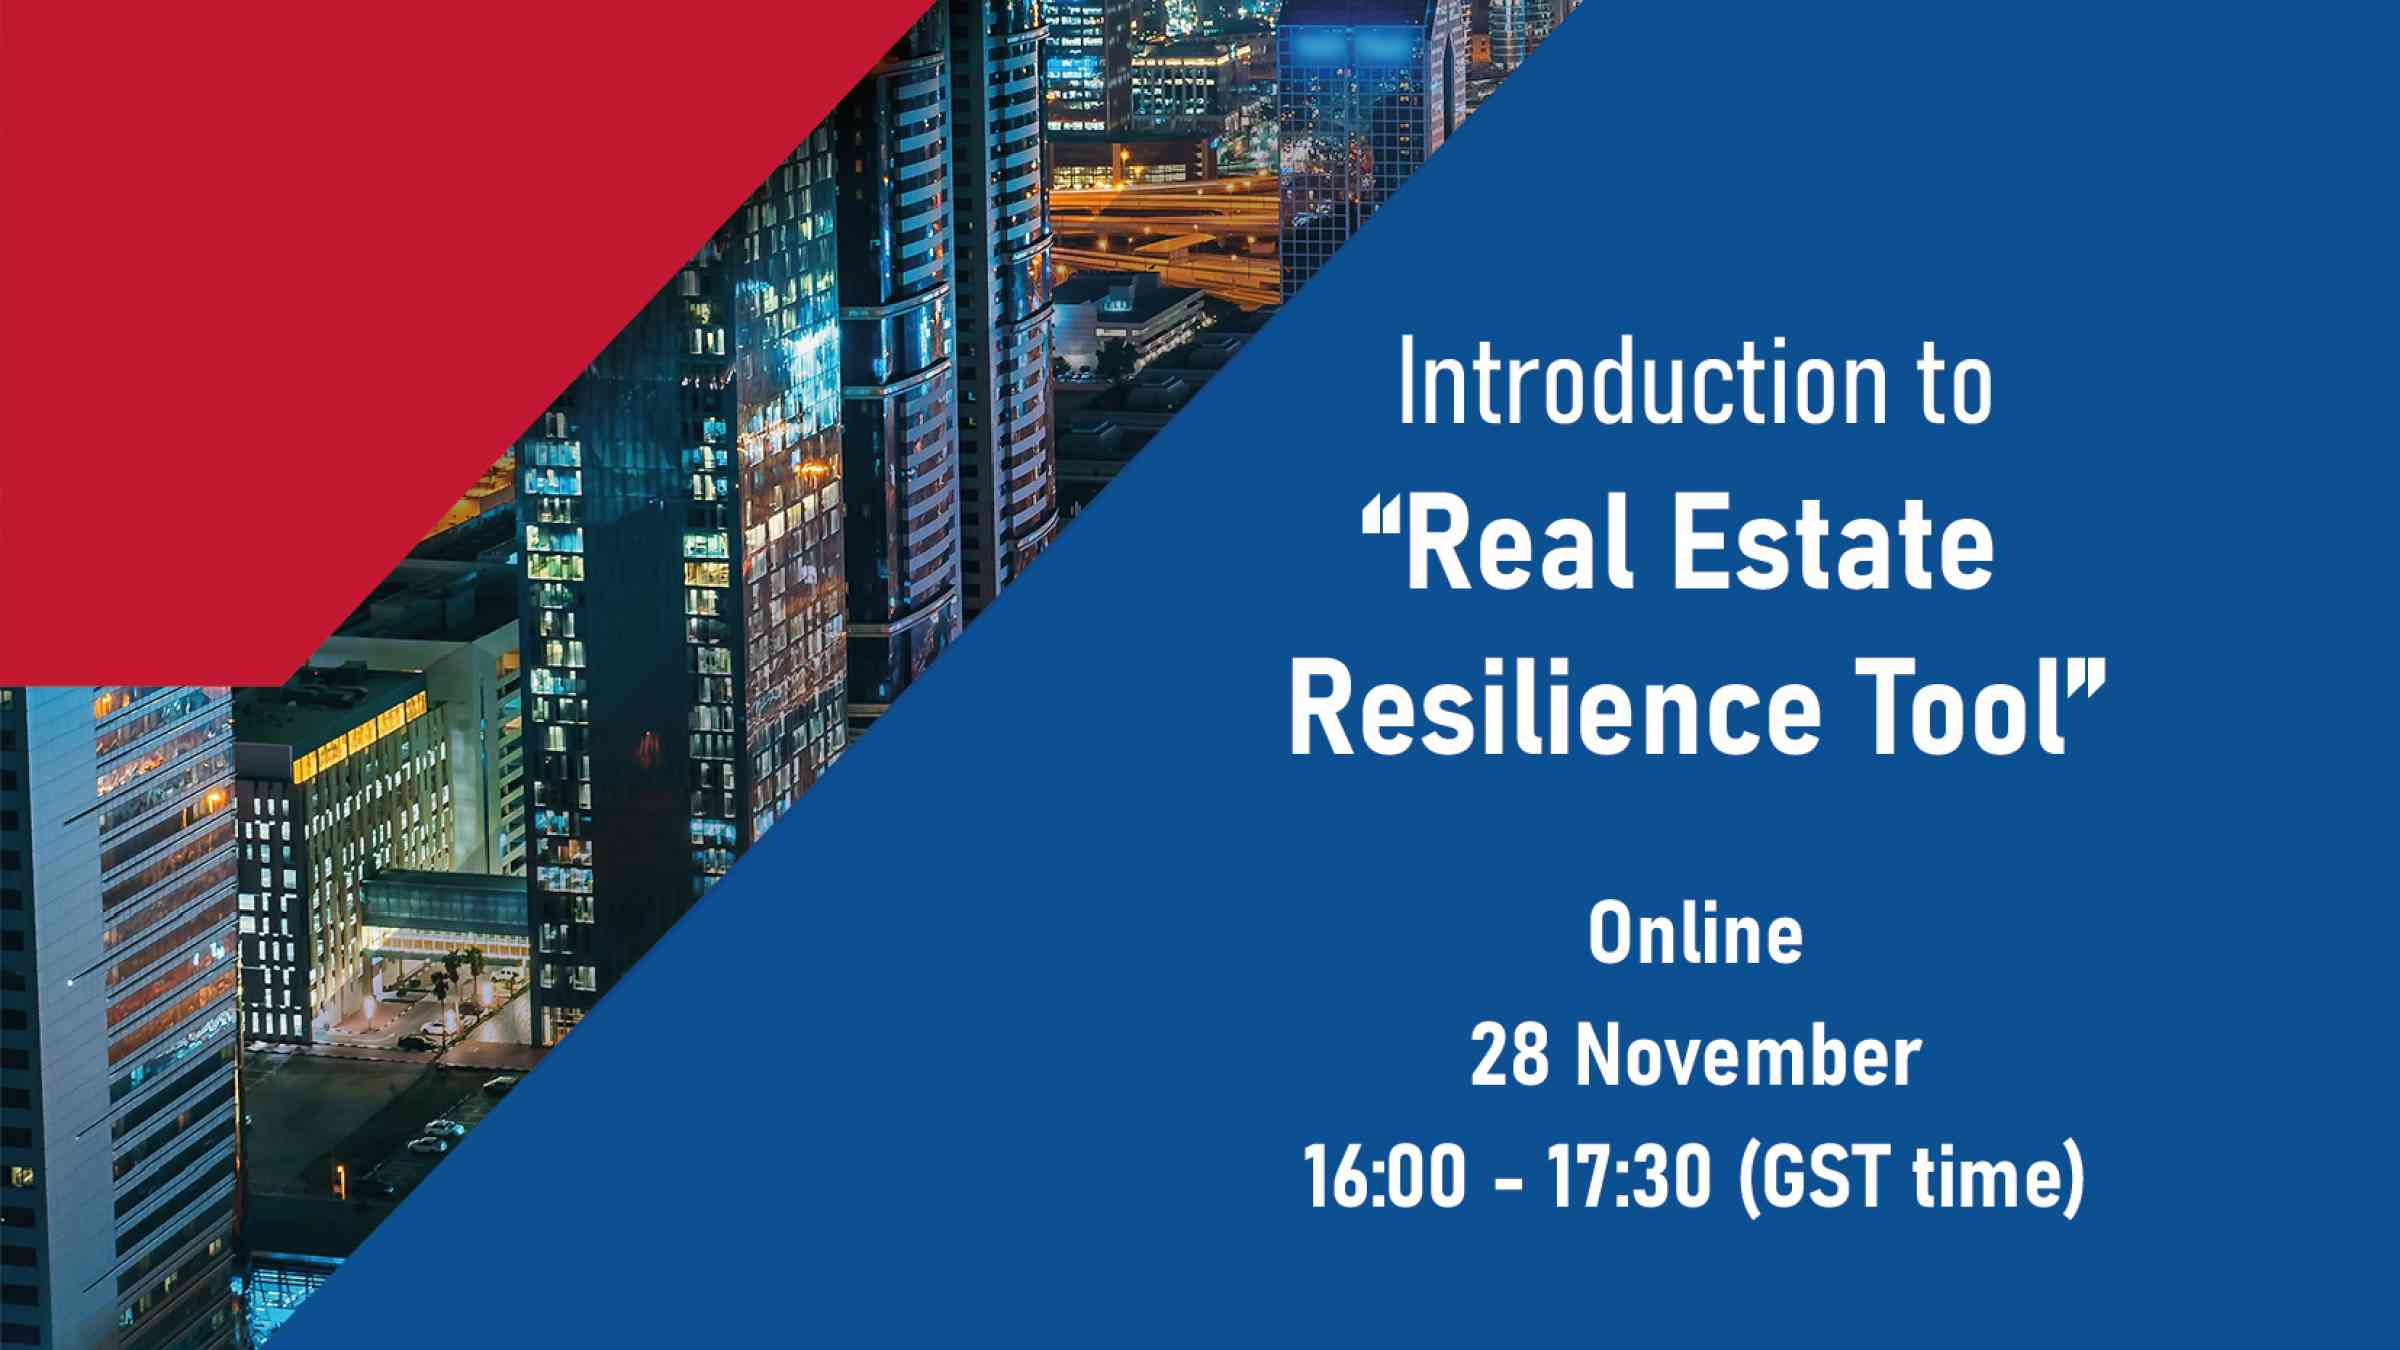 UNDRR and FIABCI Introduce the Real Estate Resilience Tool 